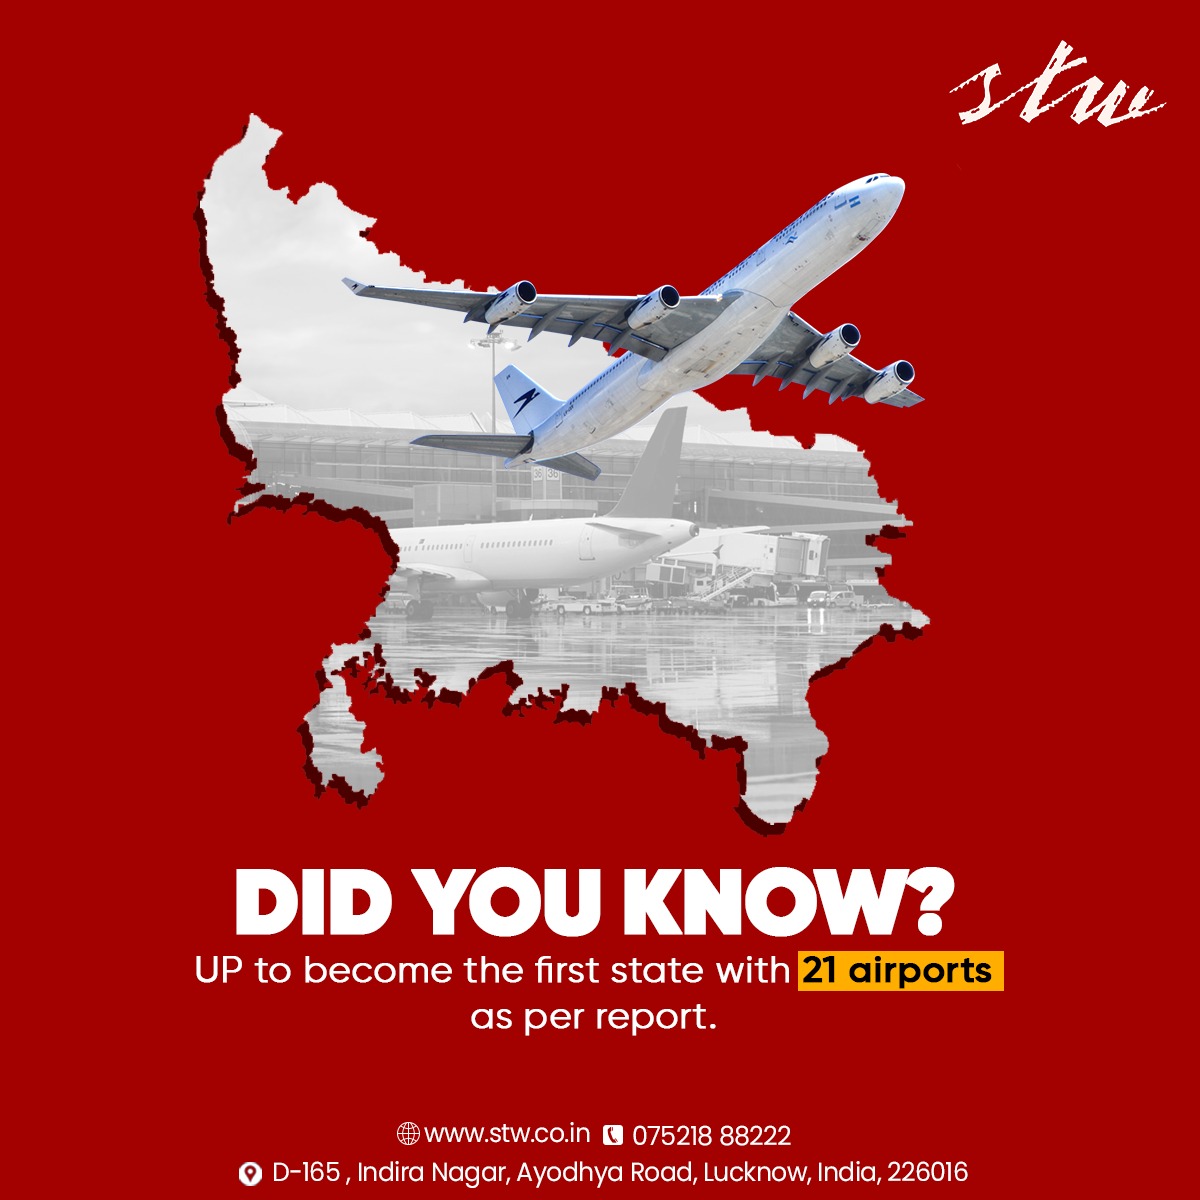 DID YOU KNOW? UP is set to make history by becoming the first state in India with 21 airports! Build your brand with STW️
.
.
#PuneAirport #TravelGrowth #AirportTraffic #AirTravel #Progress2024 #MarketingMatters #FlyingHigh #UP21Airports #AviationMileston